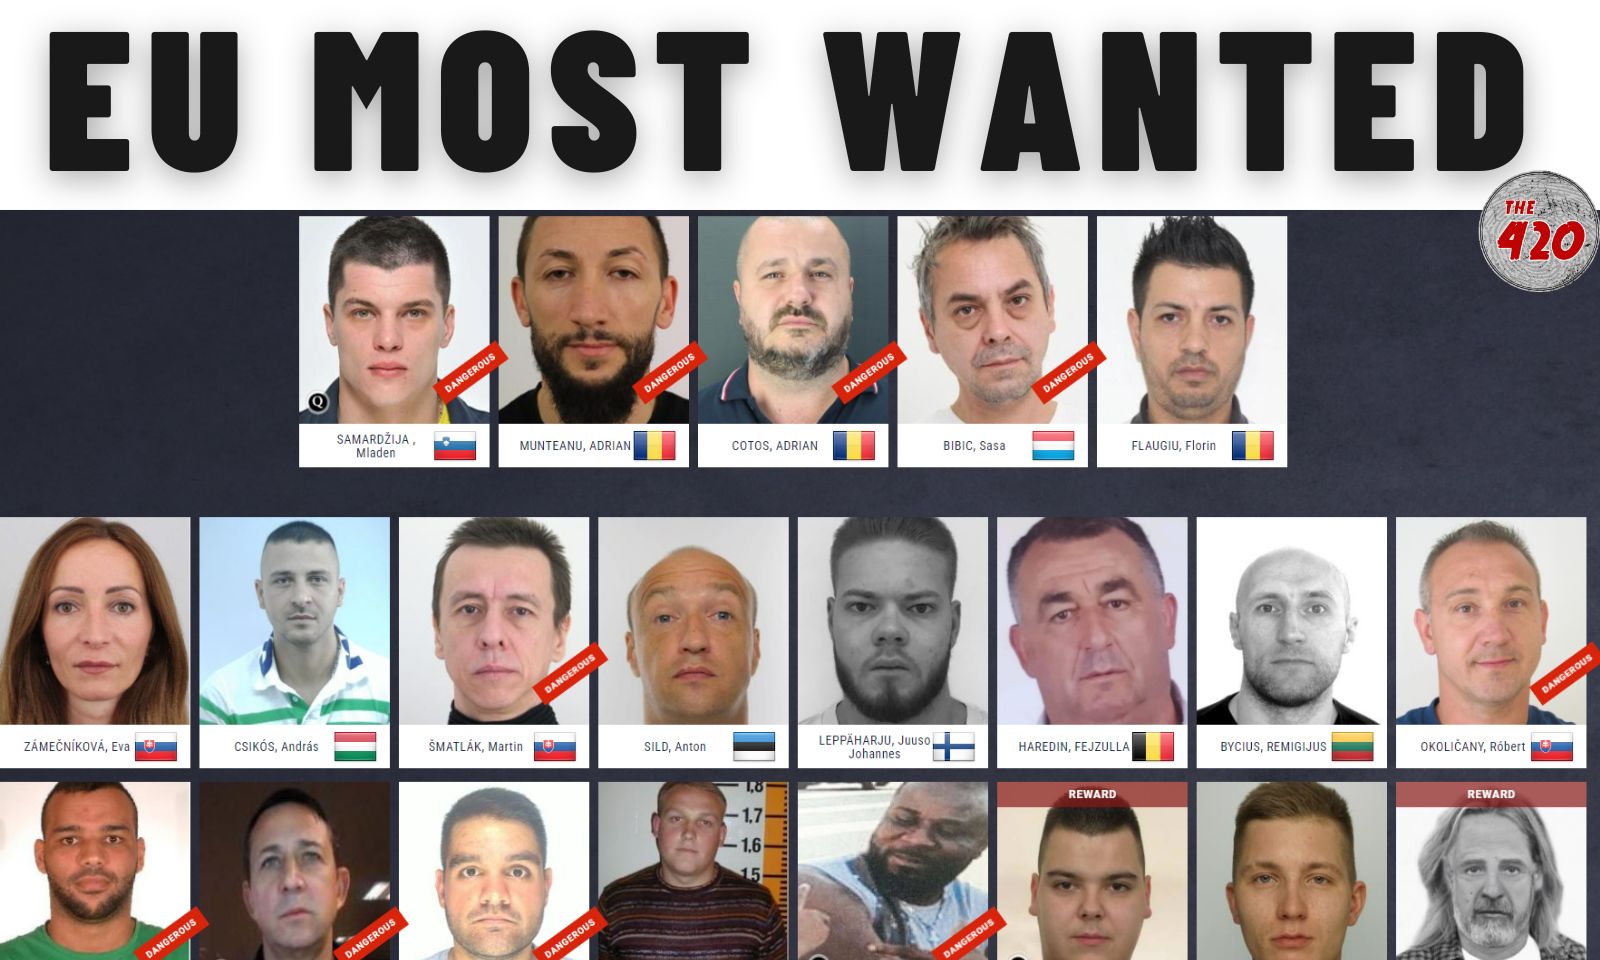 EU Most Wanted: Help Track Down Criminals – You Could Be the Key!